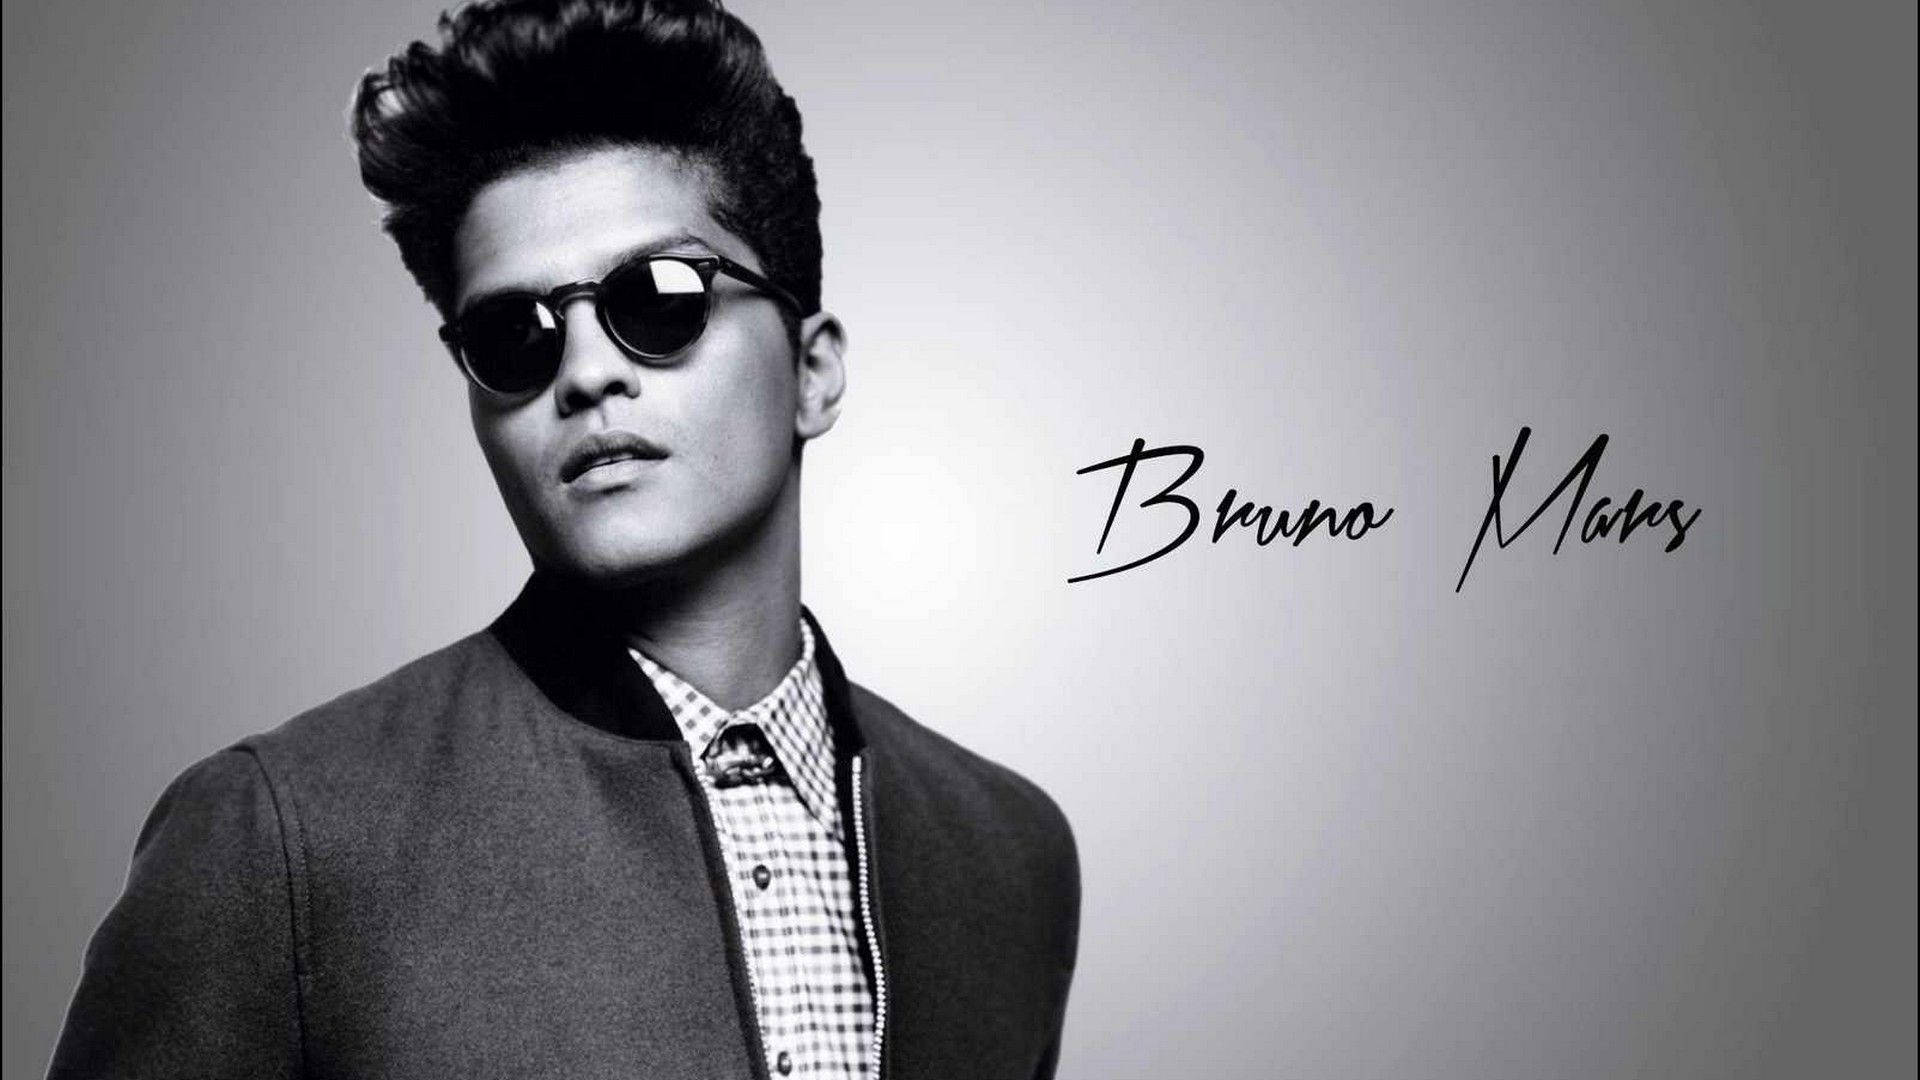 Bruno Mars all dressed up in an eye-catching outfit Wallpaper